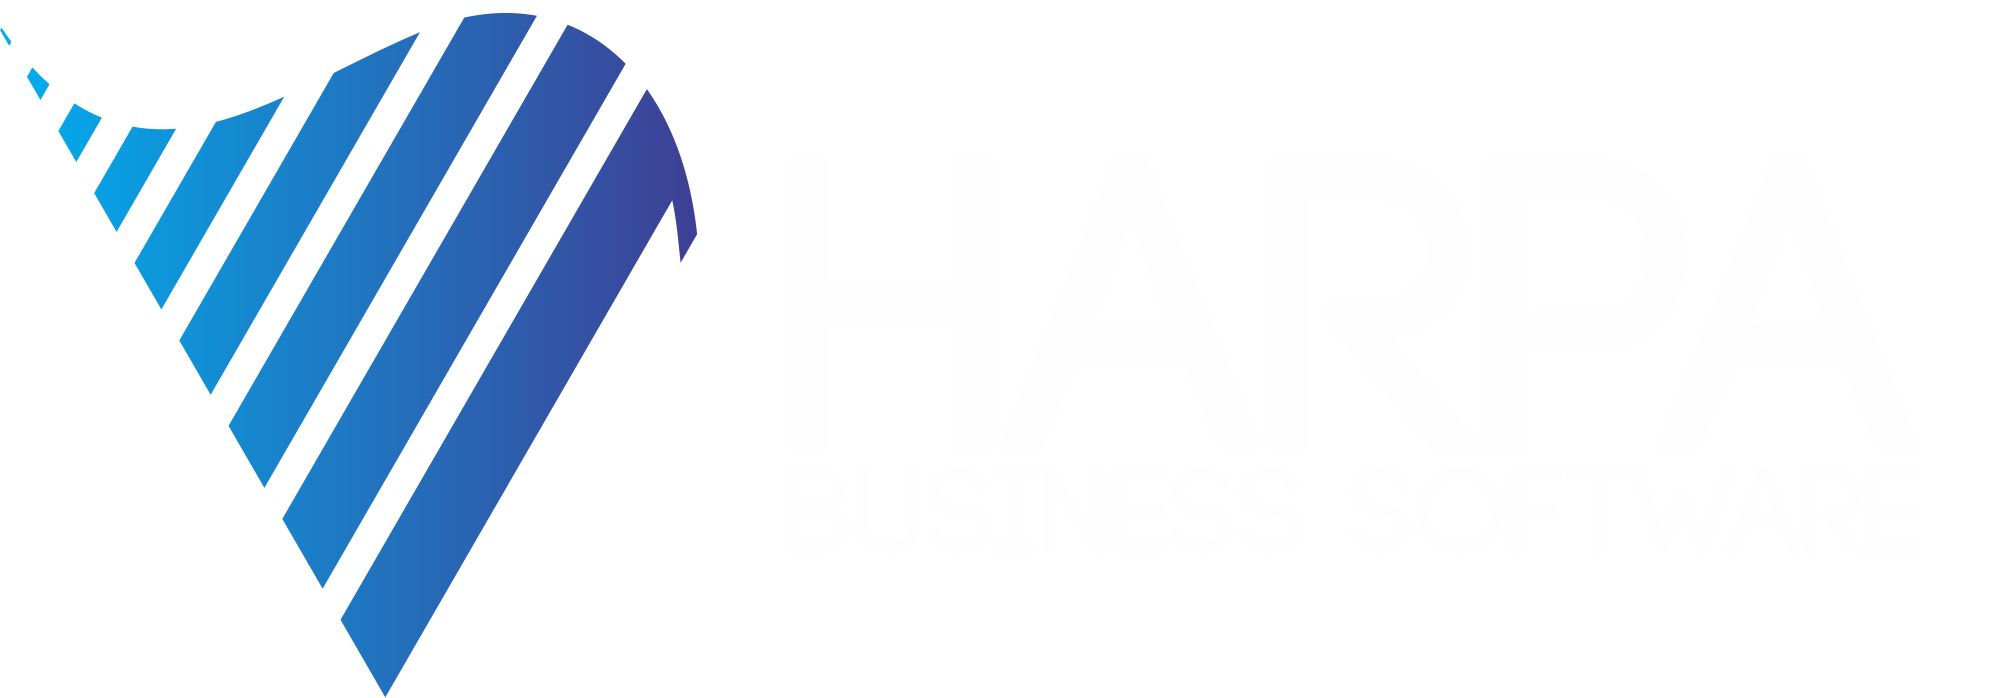 Harpa - Business Software